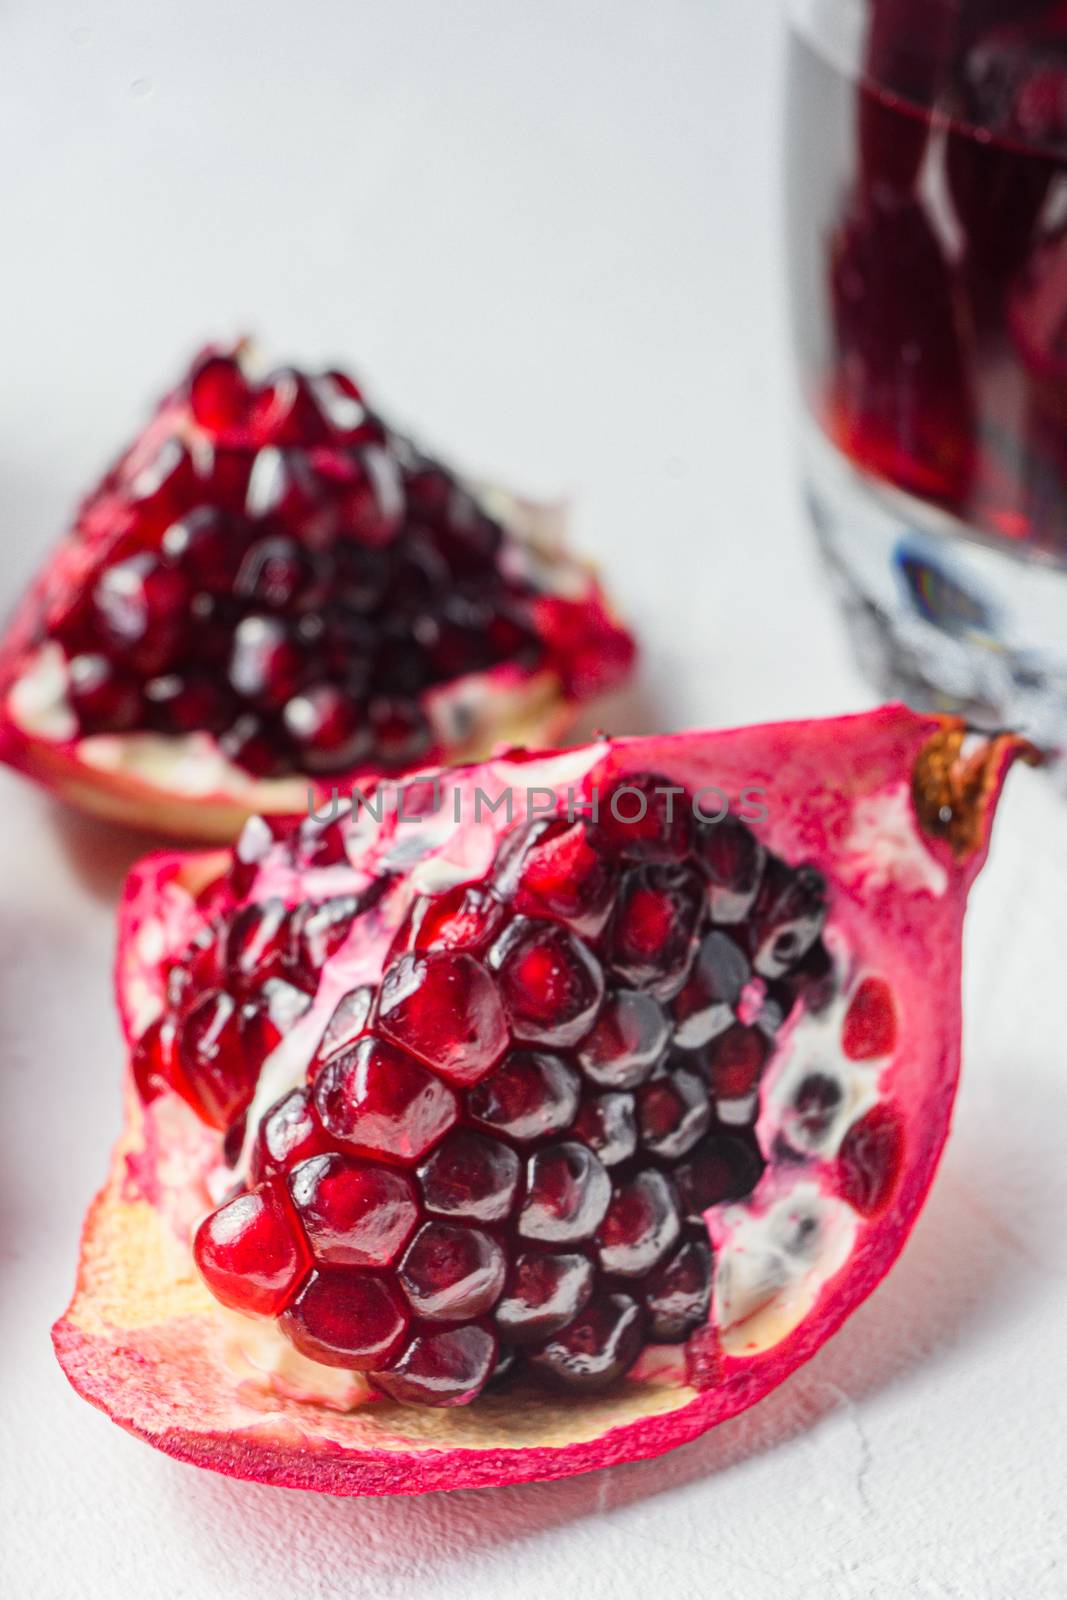 Pomegranate cut with seeds close up in front of garnet cut and juice in glass side view, selective focus by Ilianesolenyi